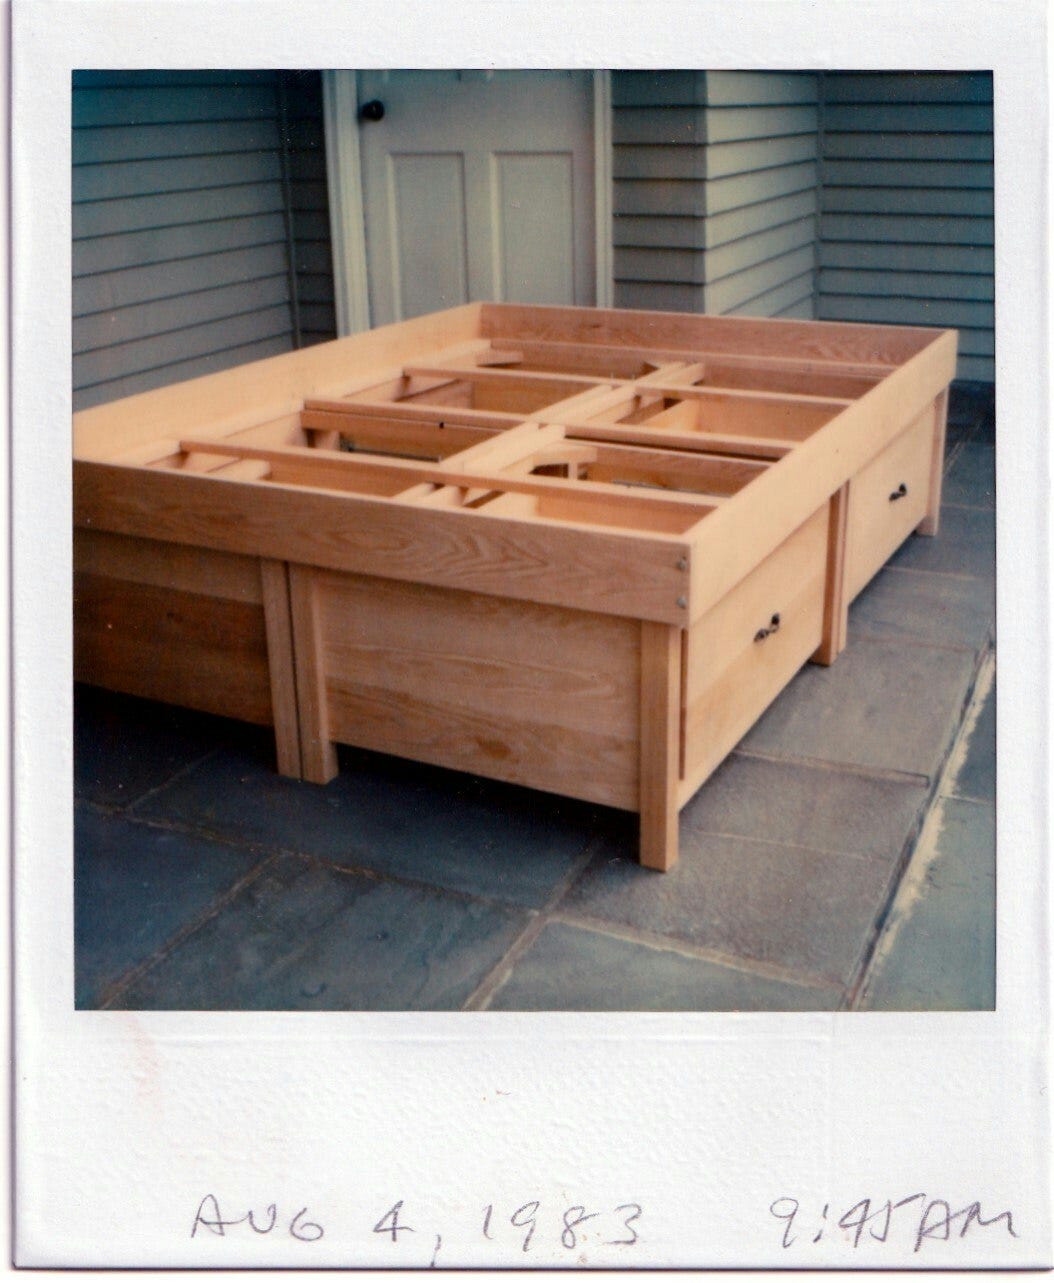 The four-drawer oak bed frame in 1983